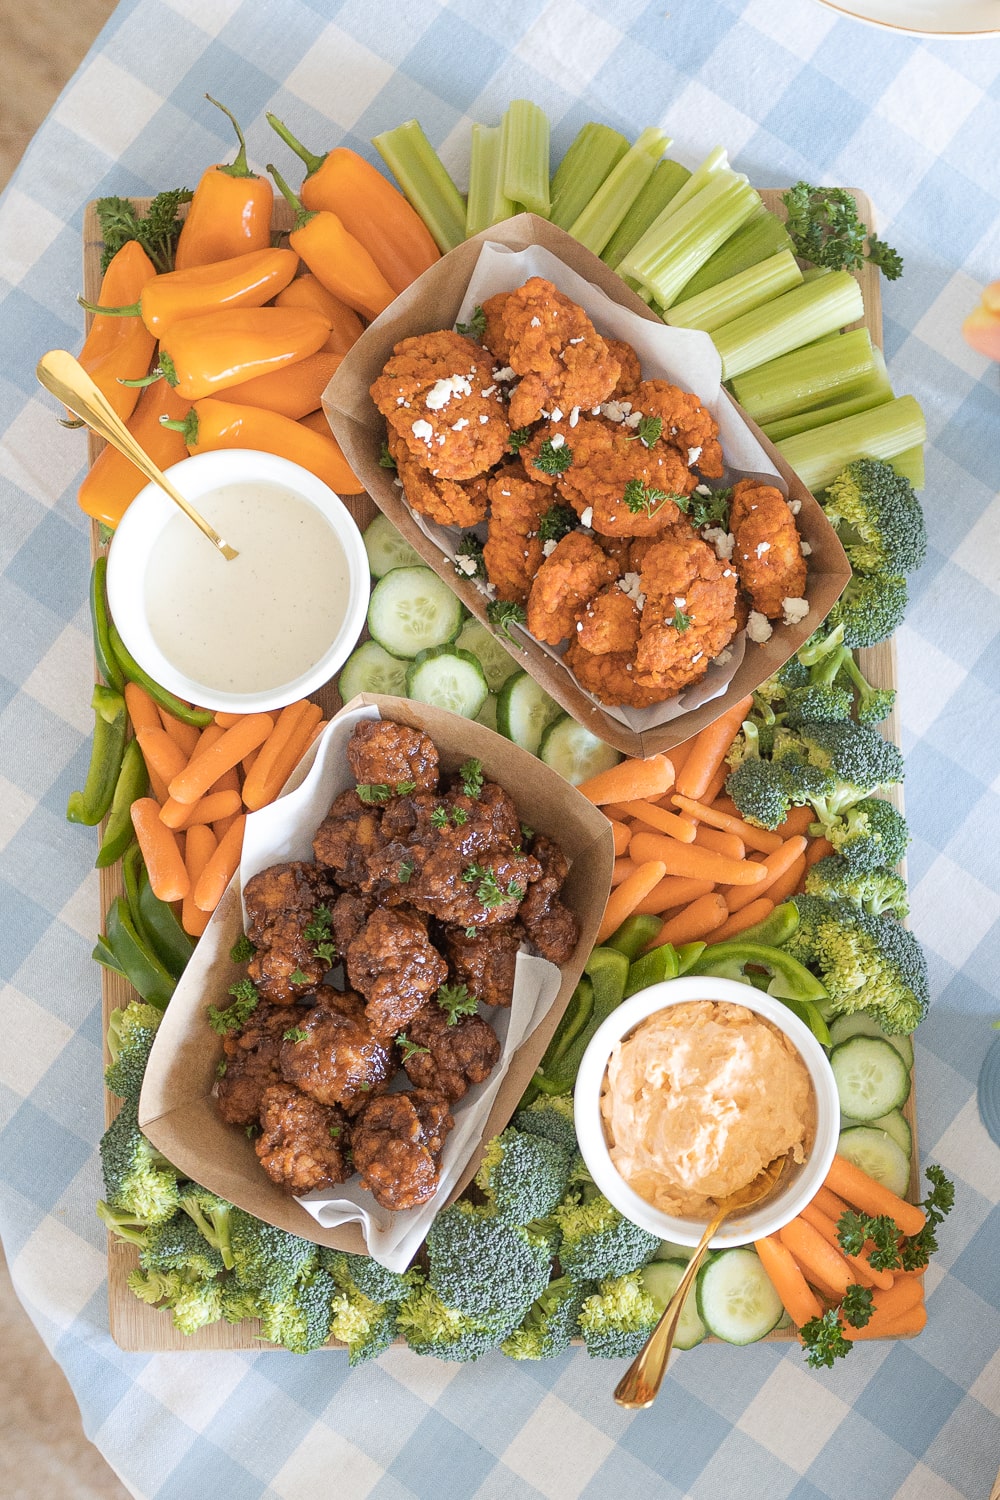 Game Day snack board made with Hy-Vee boneless chicken wings, buffalo chicken dip, ranch dressing, and fresh vegetables by southern lifestyle blogger Stephanie Ziajka on Diary of a Debutante